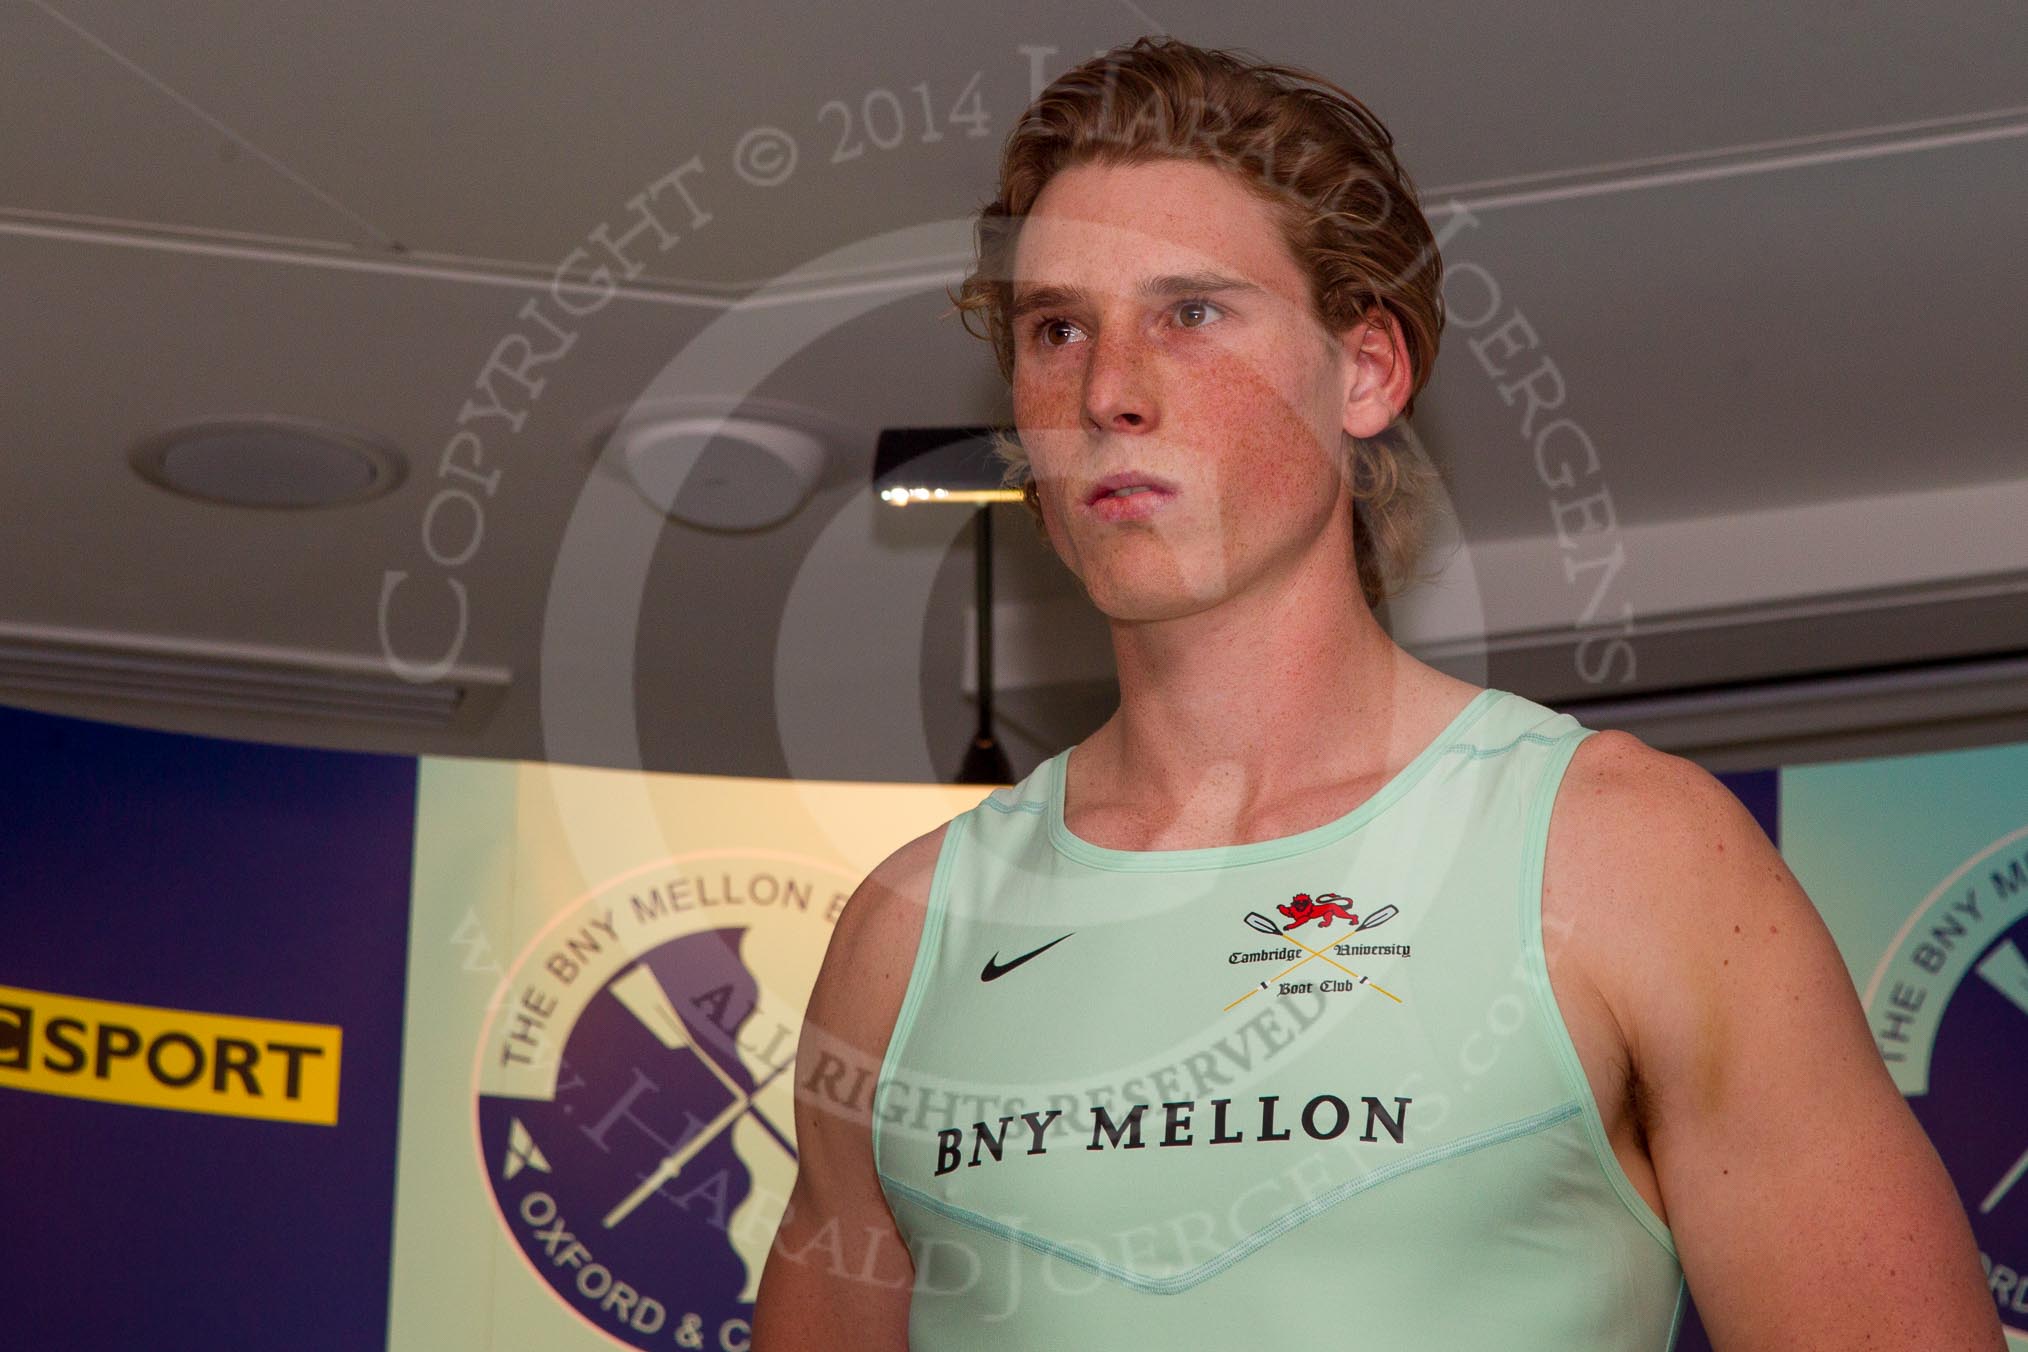 The Boat Race season 2014 - Crew Announcement and Weigh In: The 2014 Boat Race crews: Cambridge 7 seat Joshua Hooper - 92kg..
BNY Mellon Centre,
London EC4V 4LA,
London,
United Kingdom,
on 10 March 2014 at 12:04, image #108